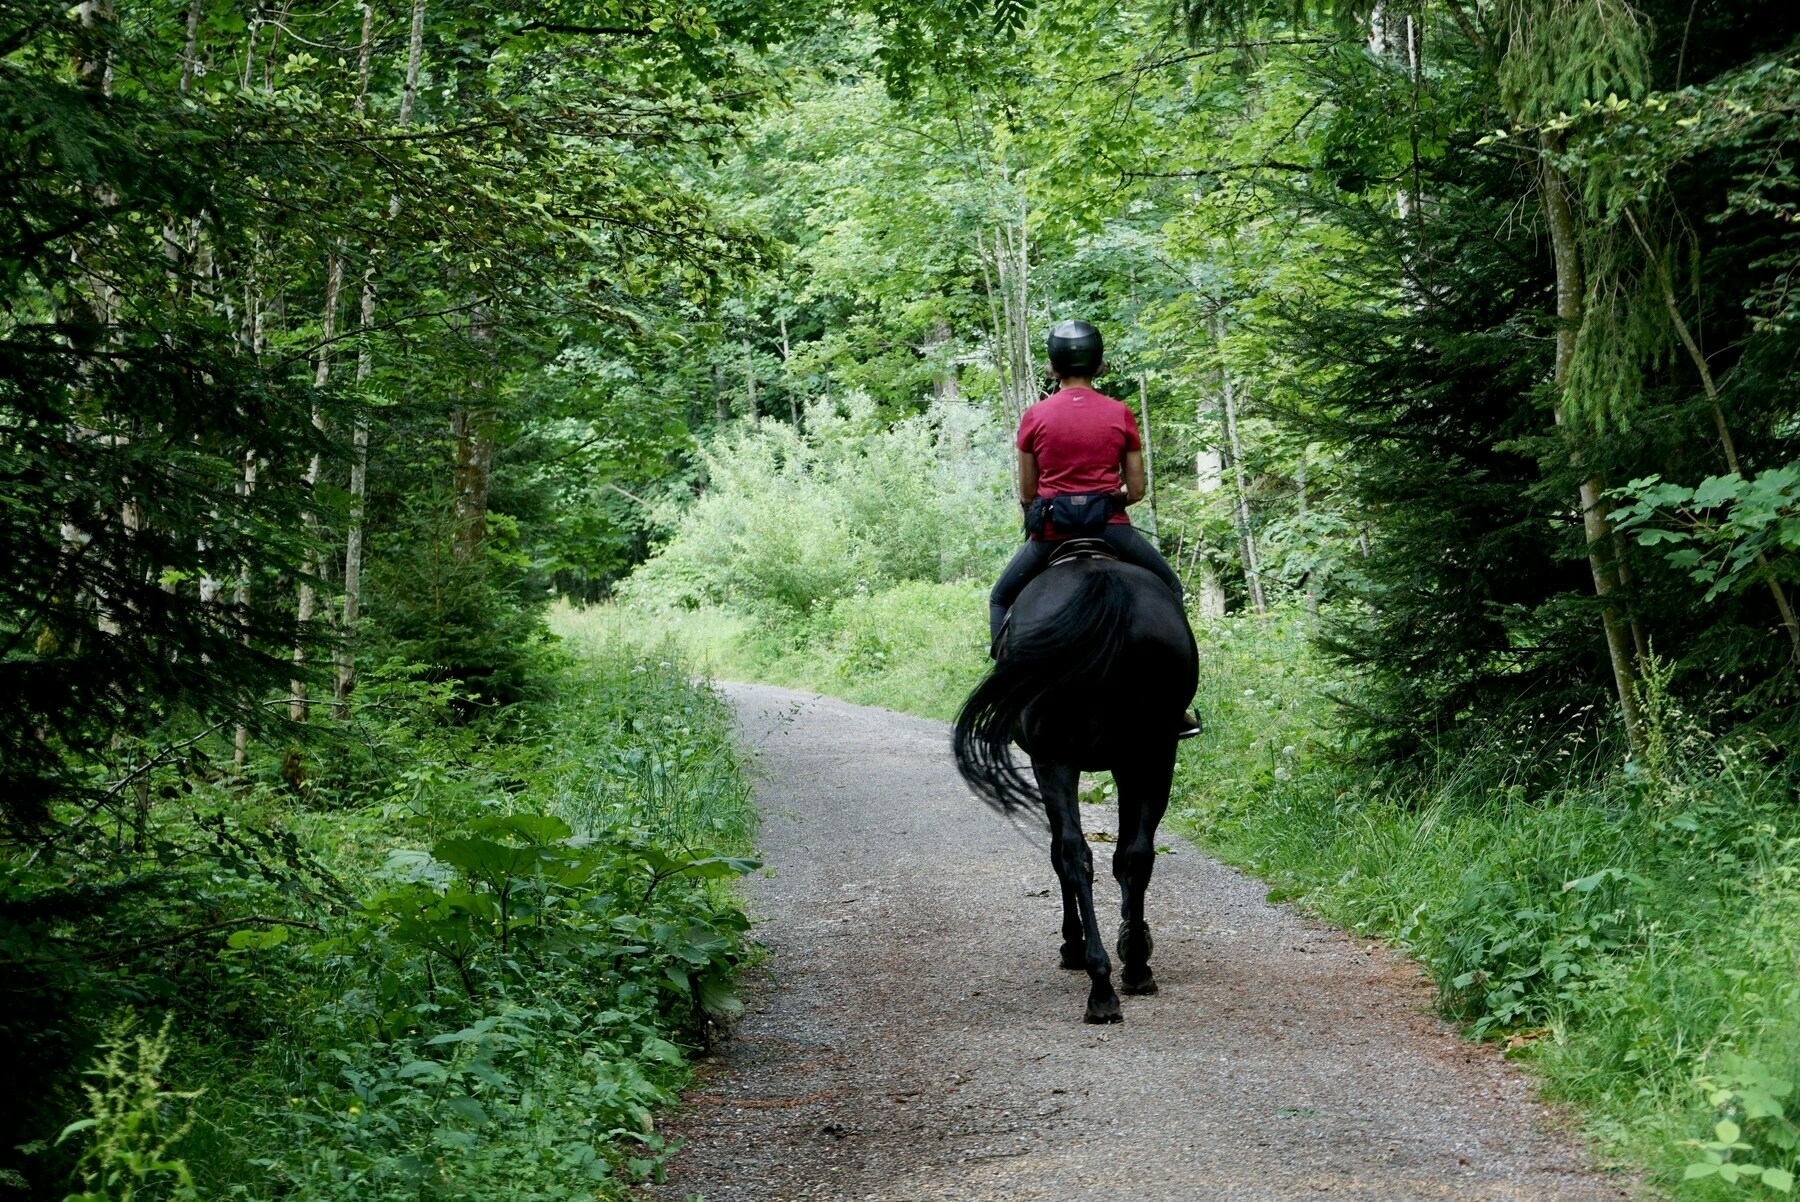 a rider on horseback racing away down a forest path